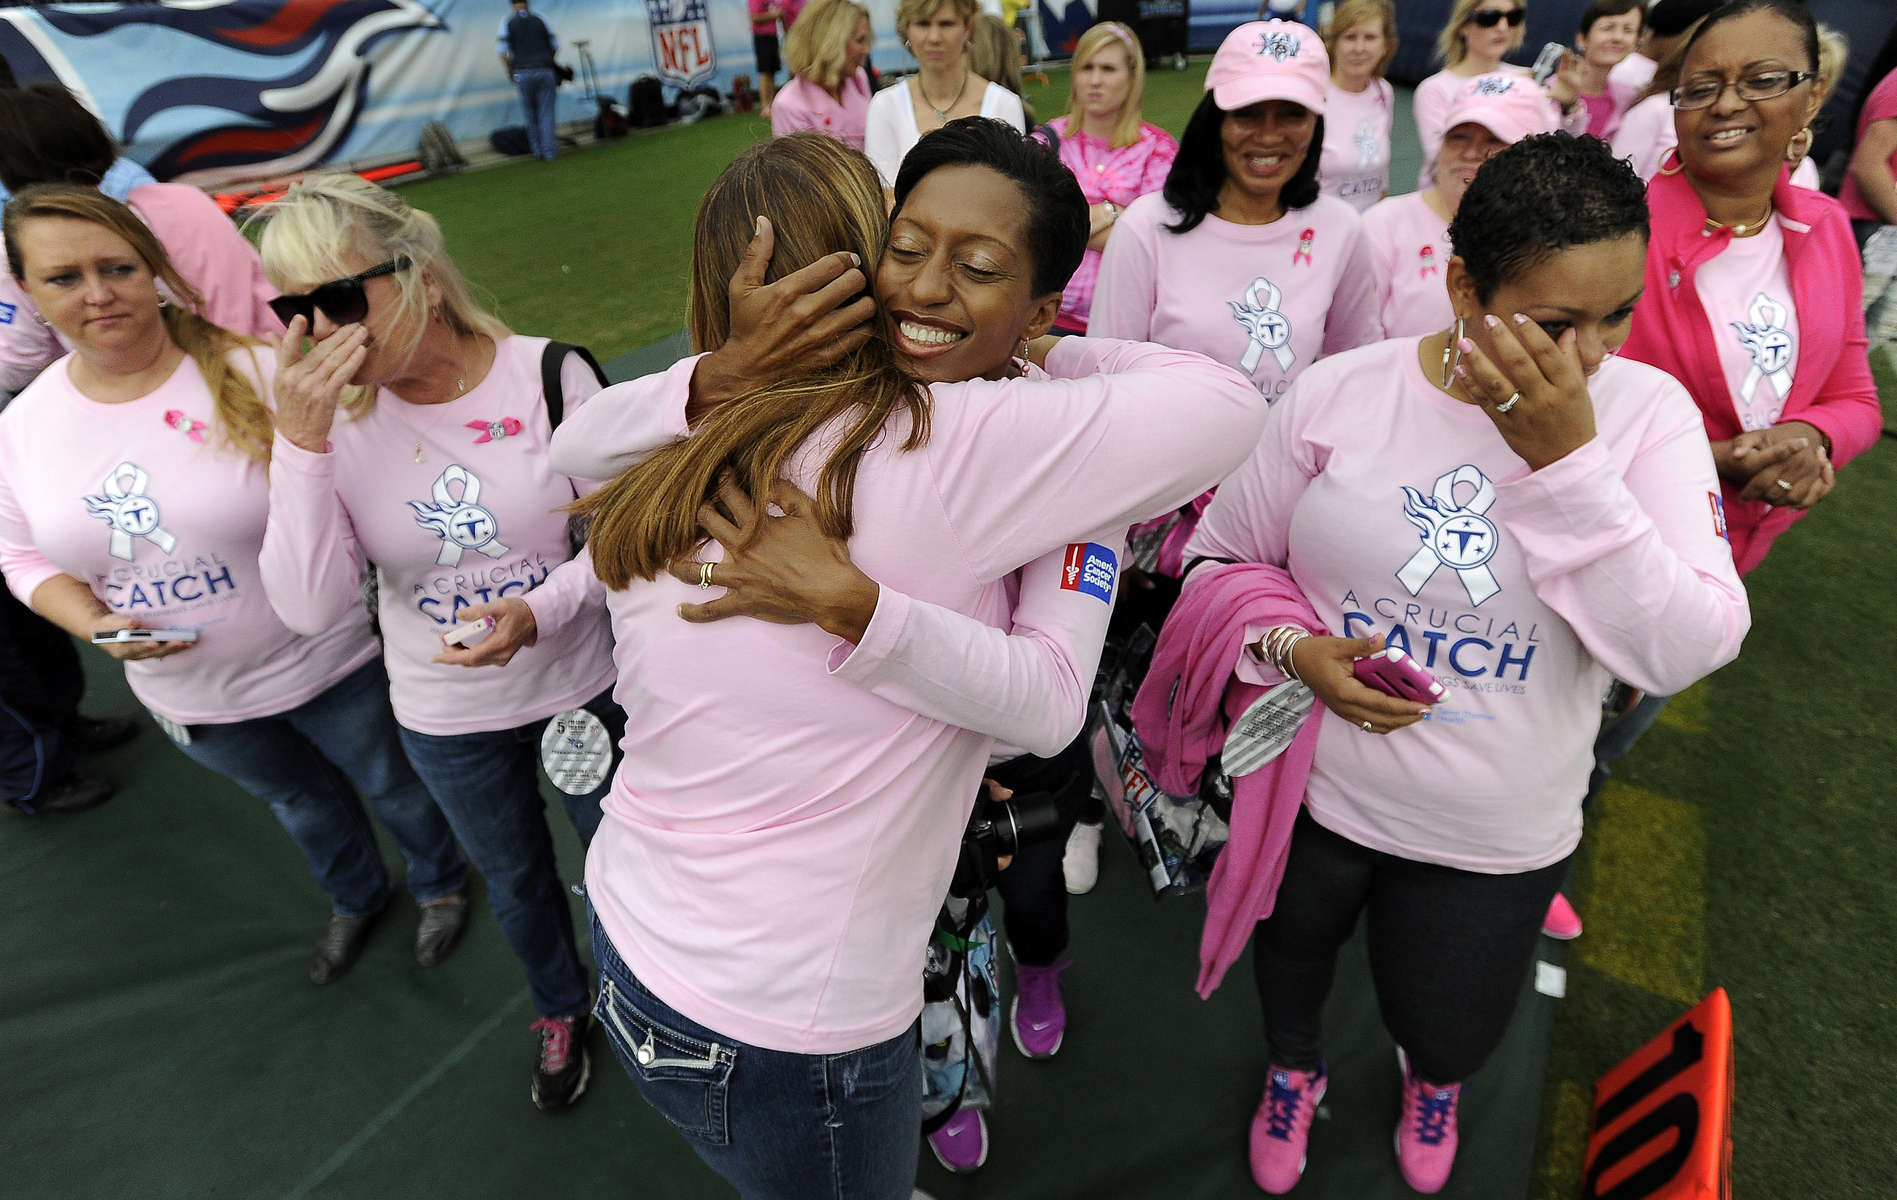 Breast cancer survivors are honored during a breast cancer awareness ceremony before an NFL football game between the Tennessee Titans and the KansasCity Chiefs on Oct. 6, 2013, in Nashville, Tenn. (AP Photo/ Mark Zaleski)